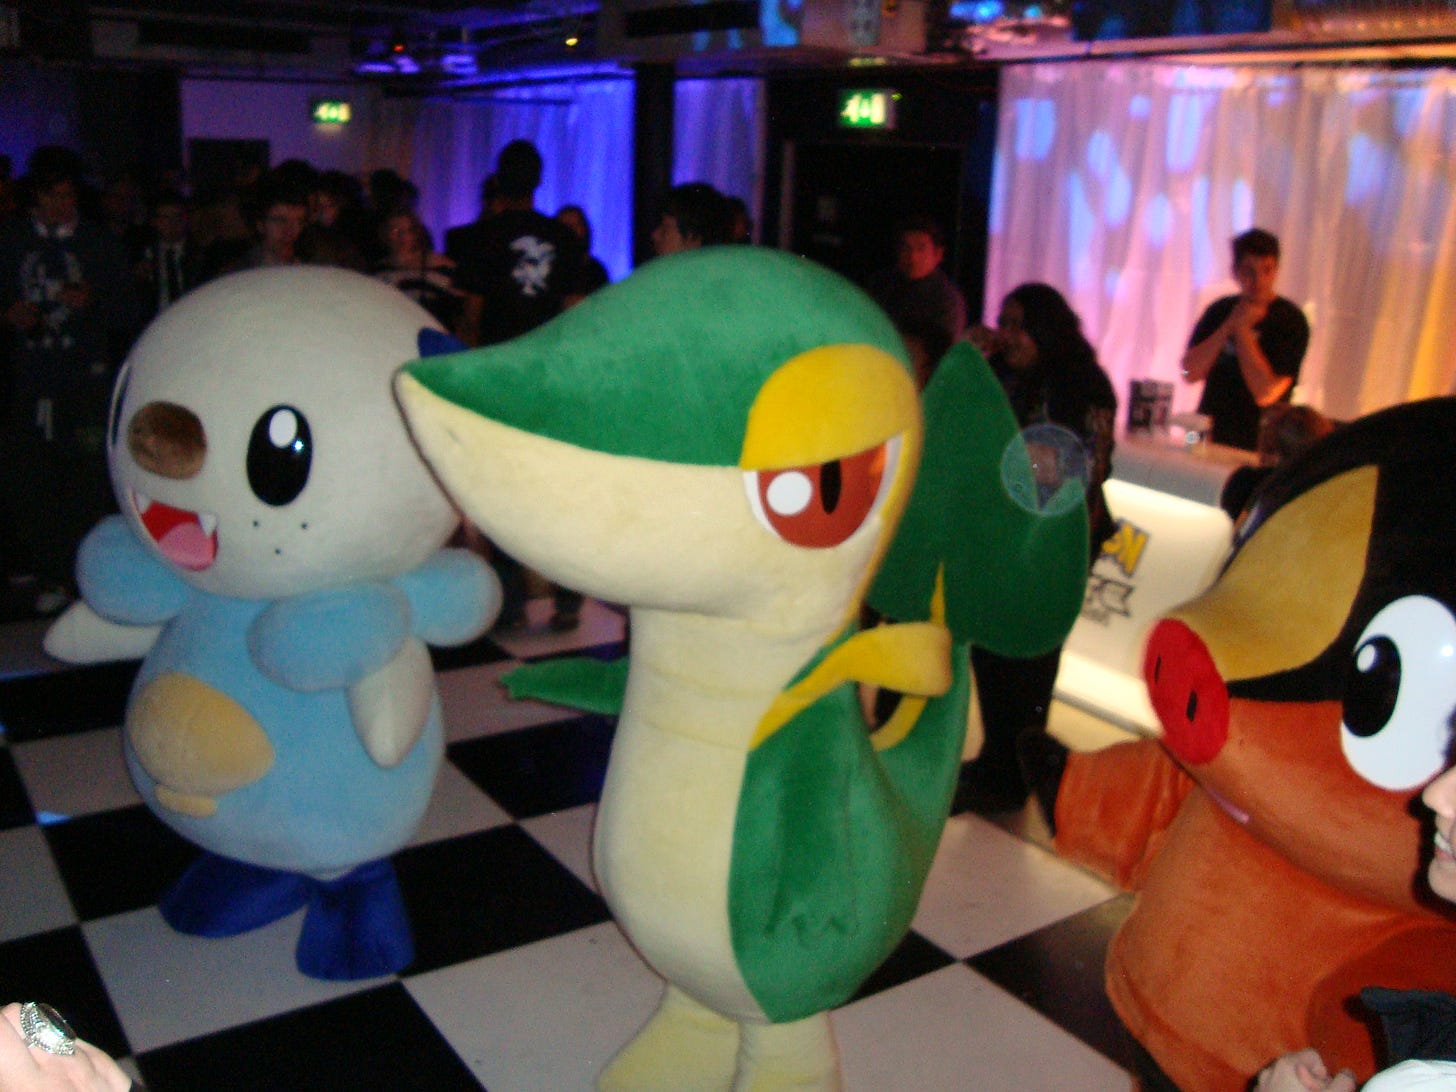 A photograph from the Pokémon Black & White launch party in 2011